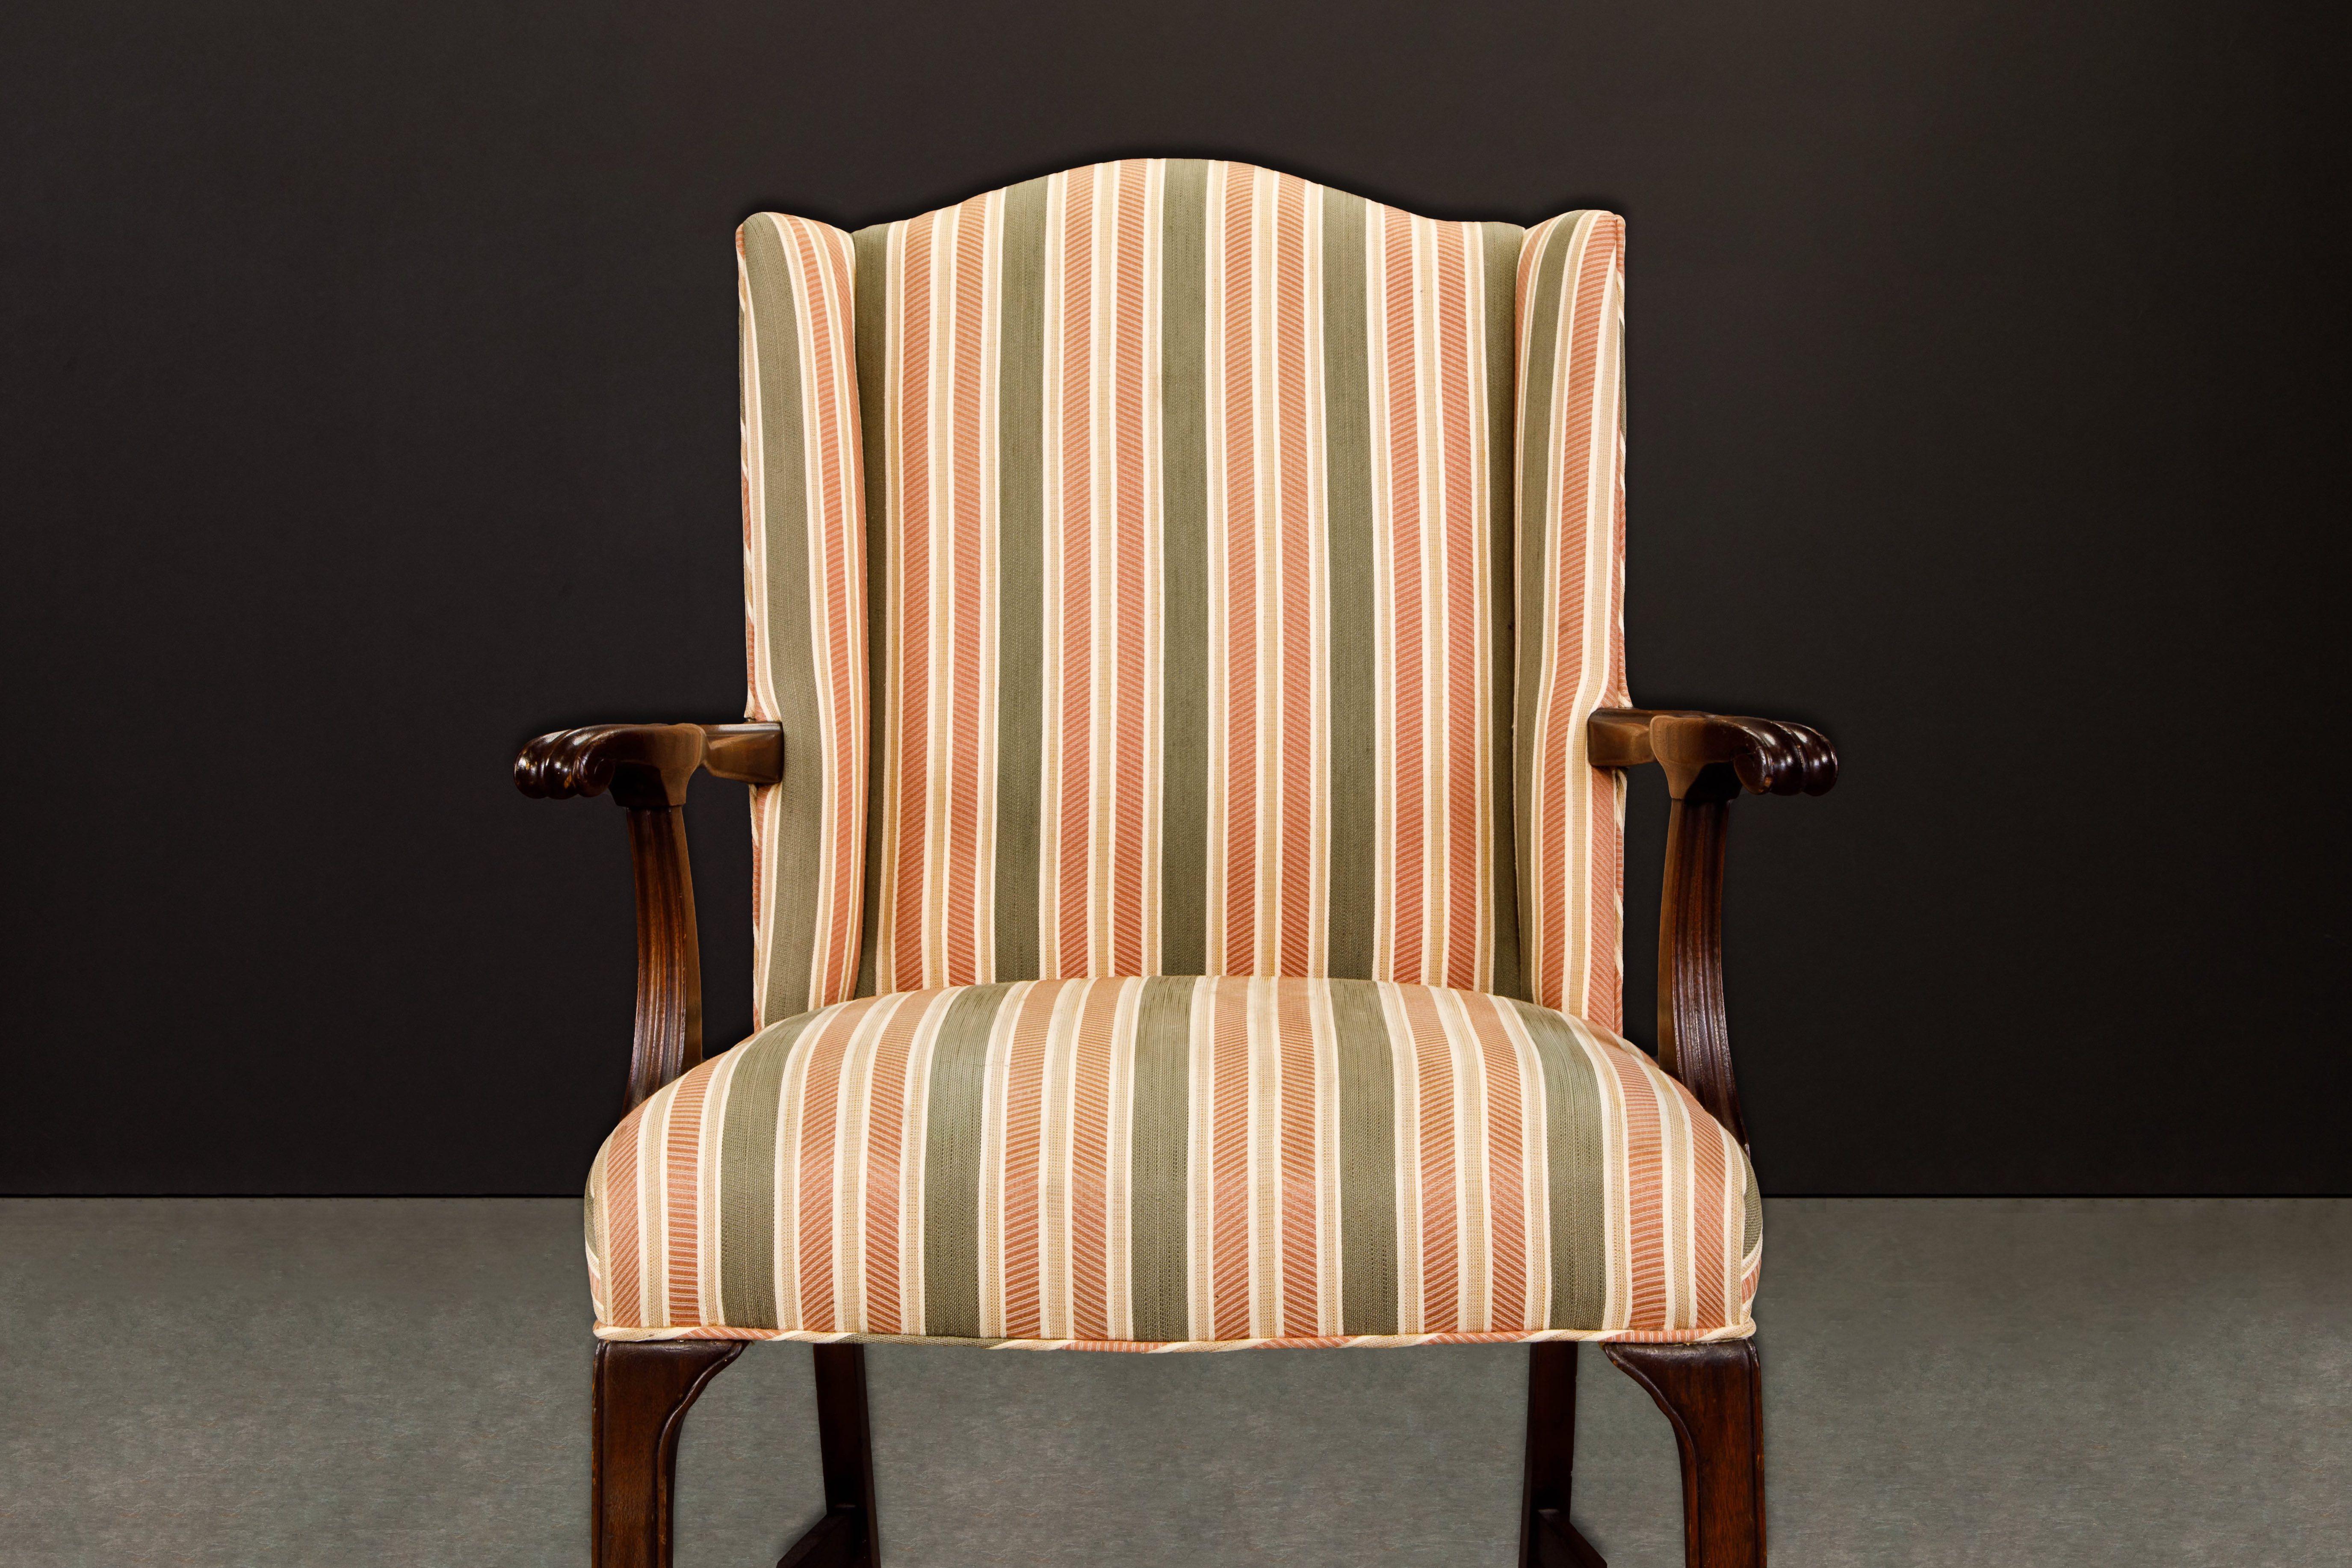 Gainsborough Wingback Armchair Upholstered in Striped Fabric 7